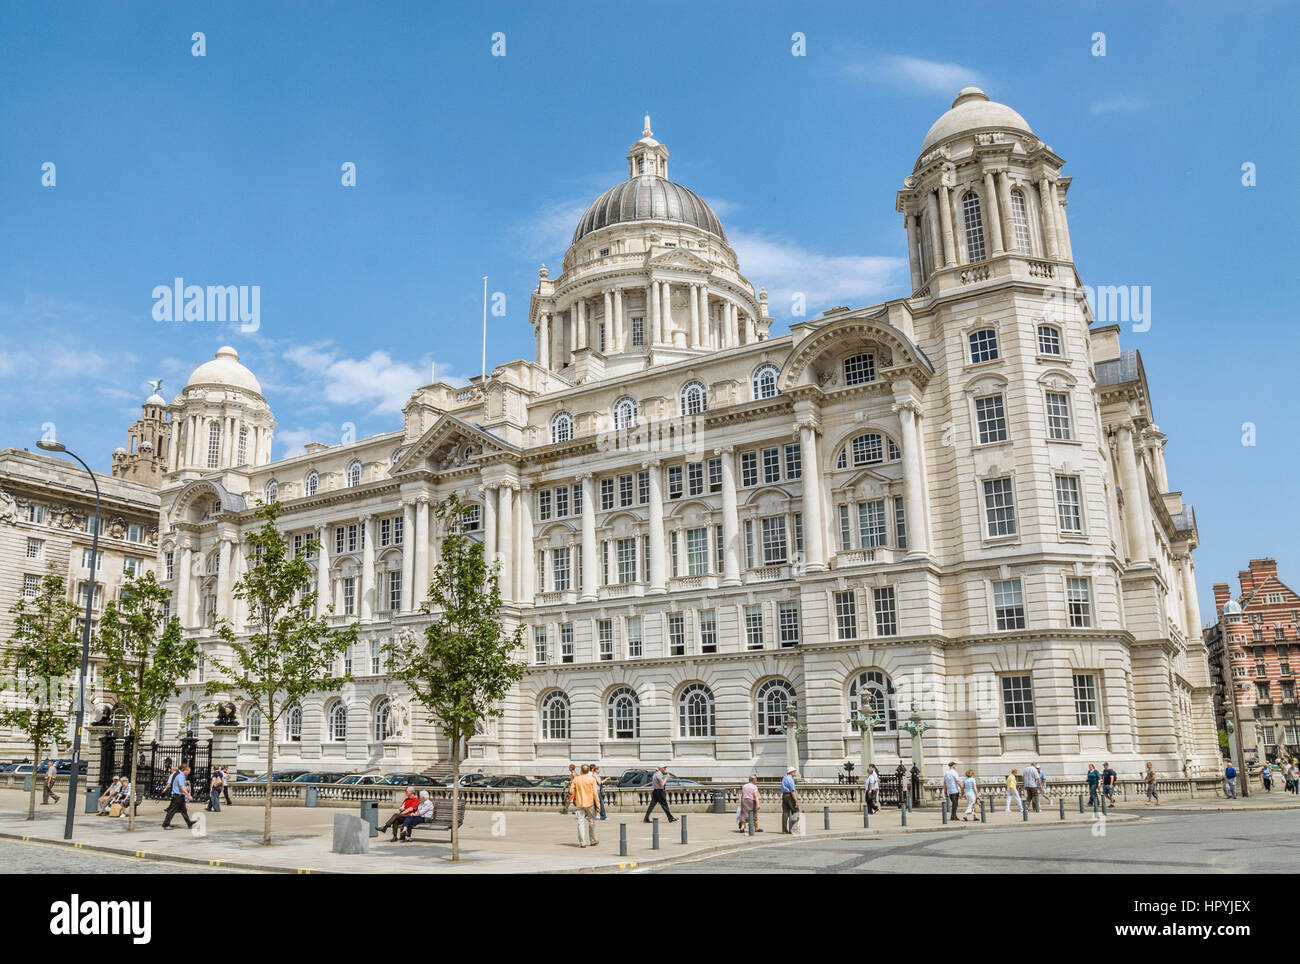 Il Port of Liverpool Building (ex Mersey Docks and Harbour Board Offices, Inghilterra, Regno Unito) Foto Stock